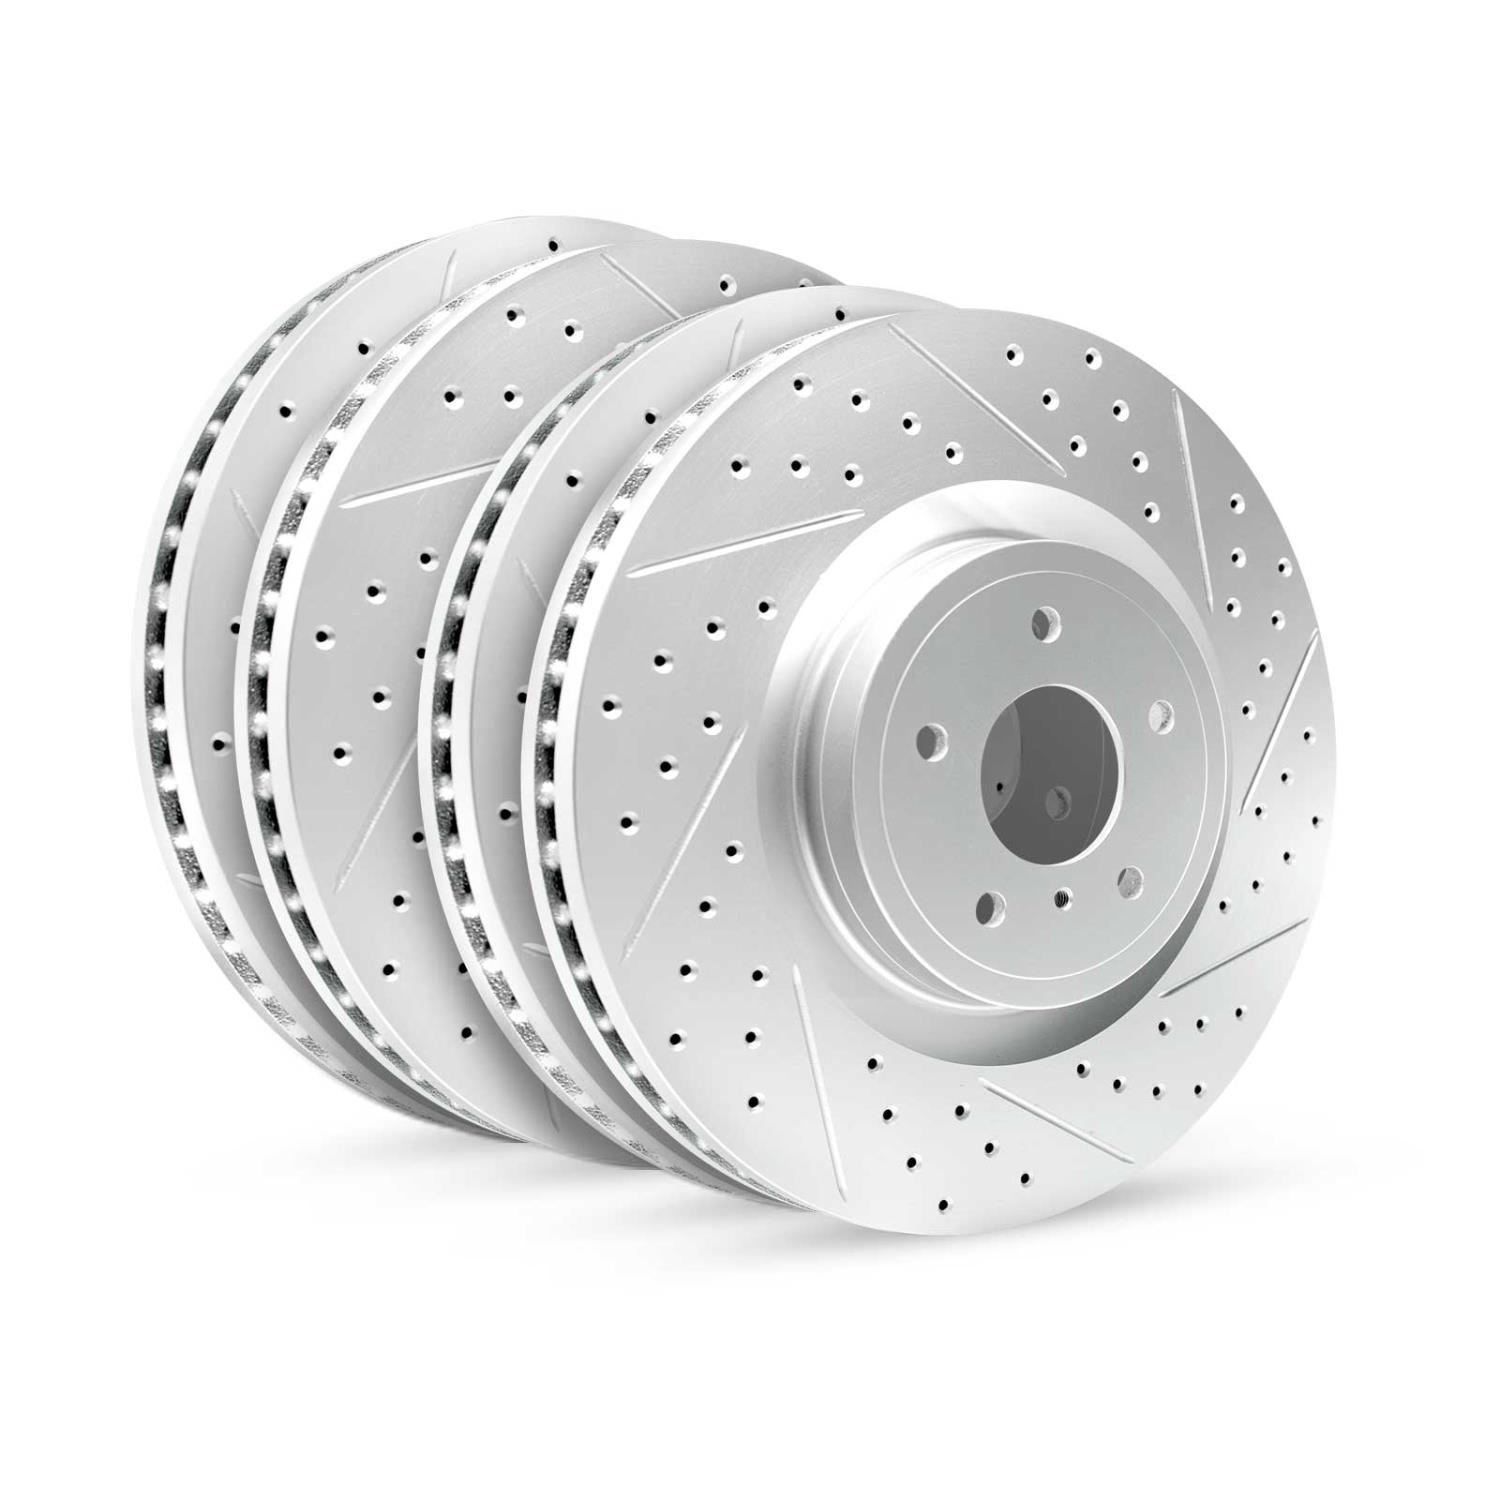 GEO-Carbon Drilled/Slotted Rotor/Drums, 1992-1997 Fits Multiple Makes/Models, Position: Front/Rear